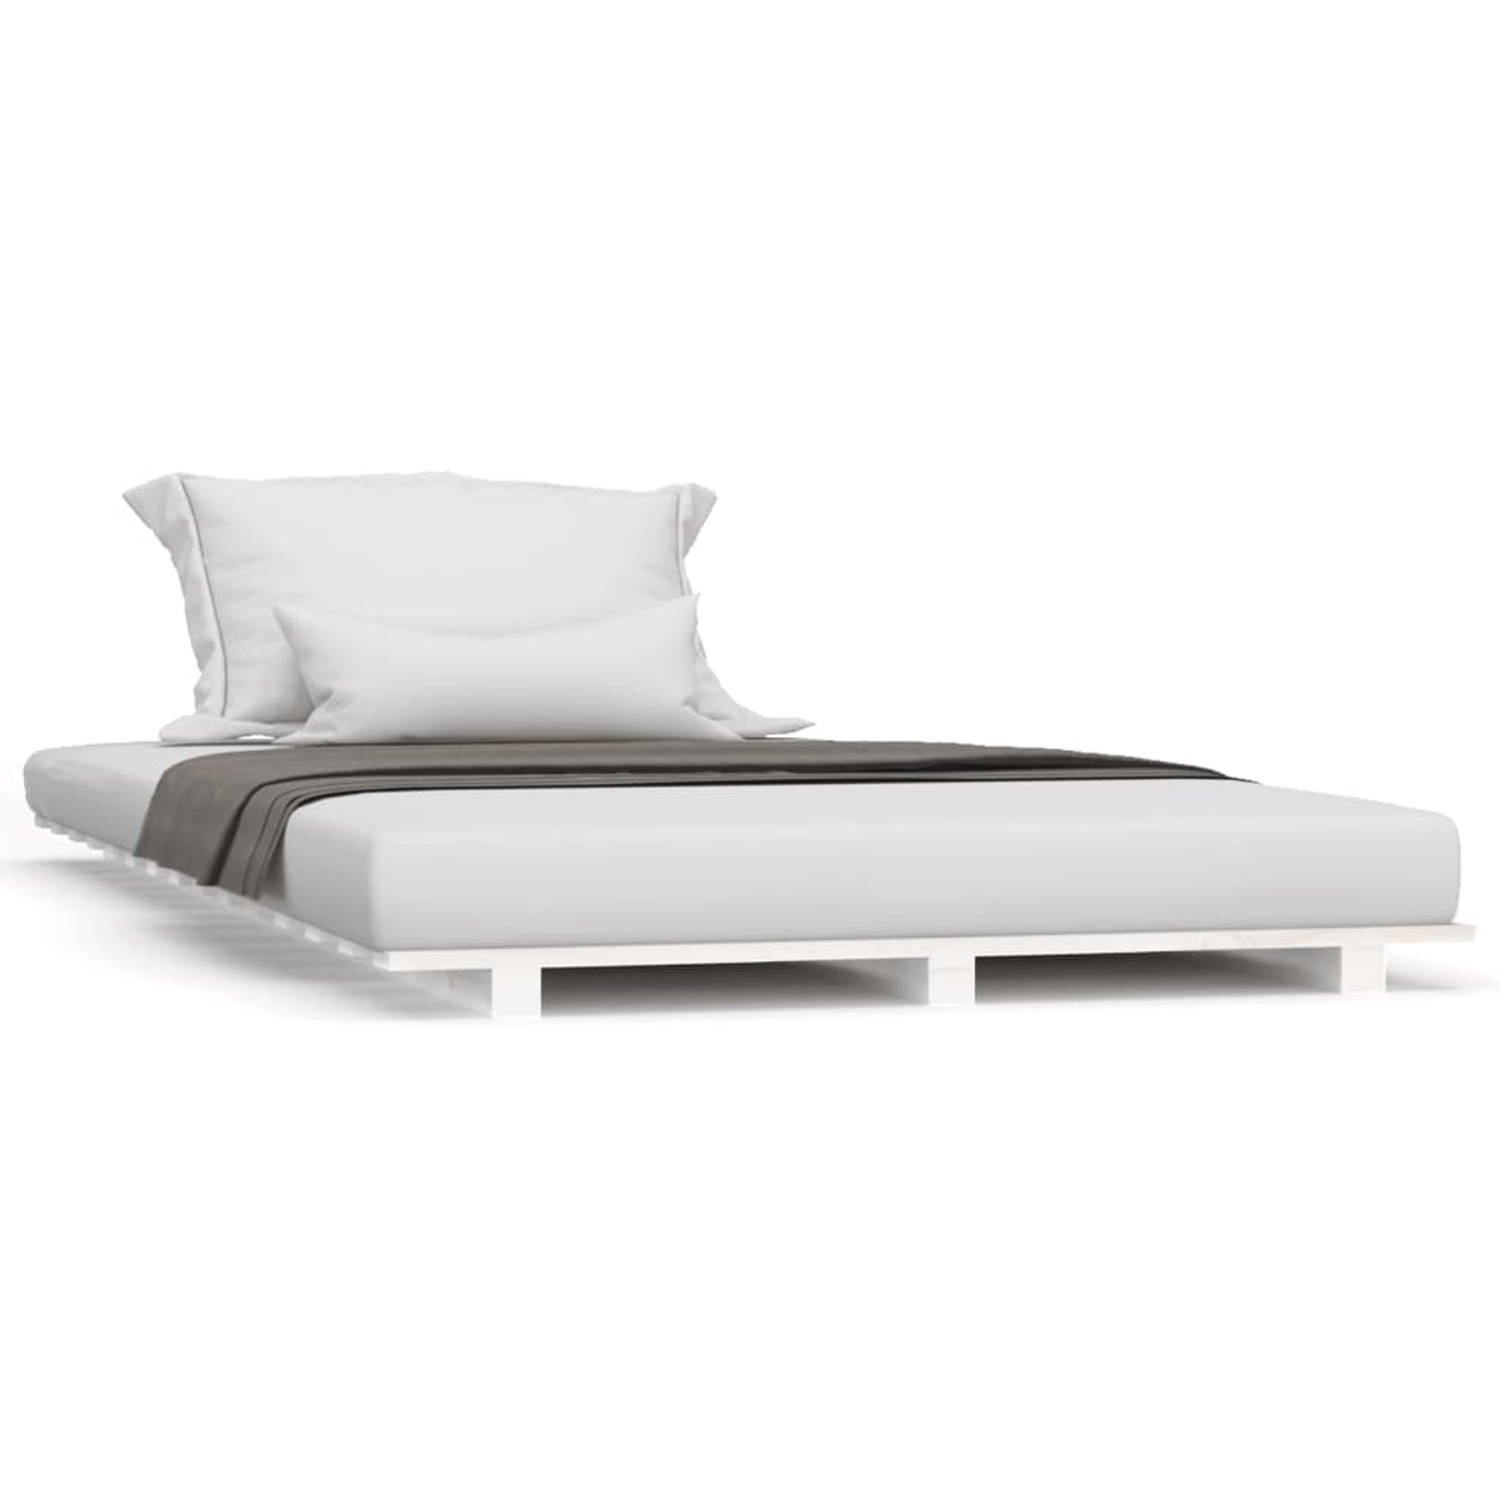 The Living Store Bedframe massief grenenhout wit 75x190 cm - Bed